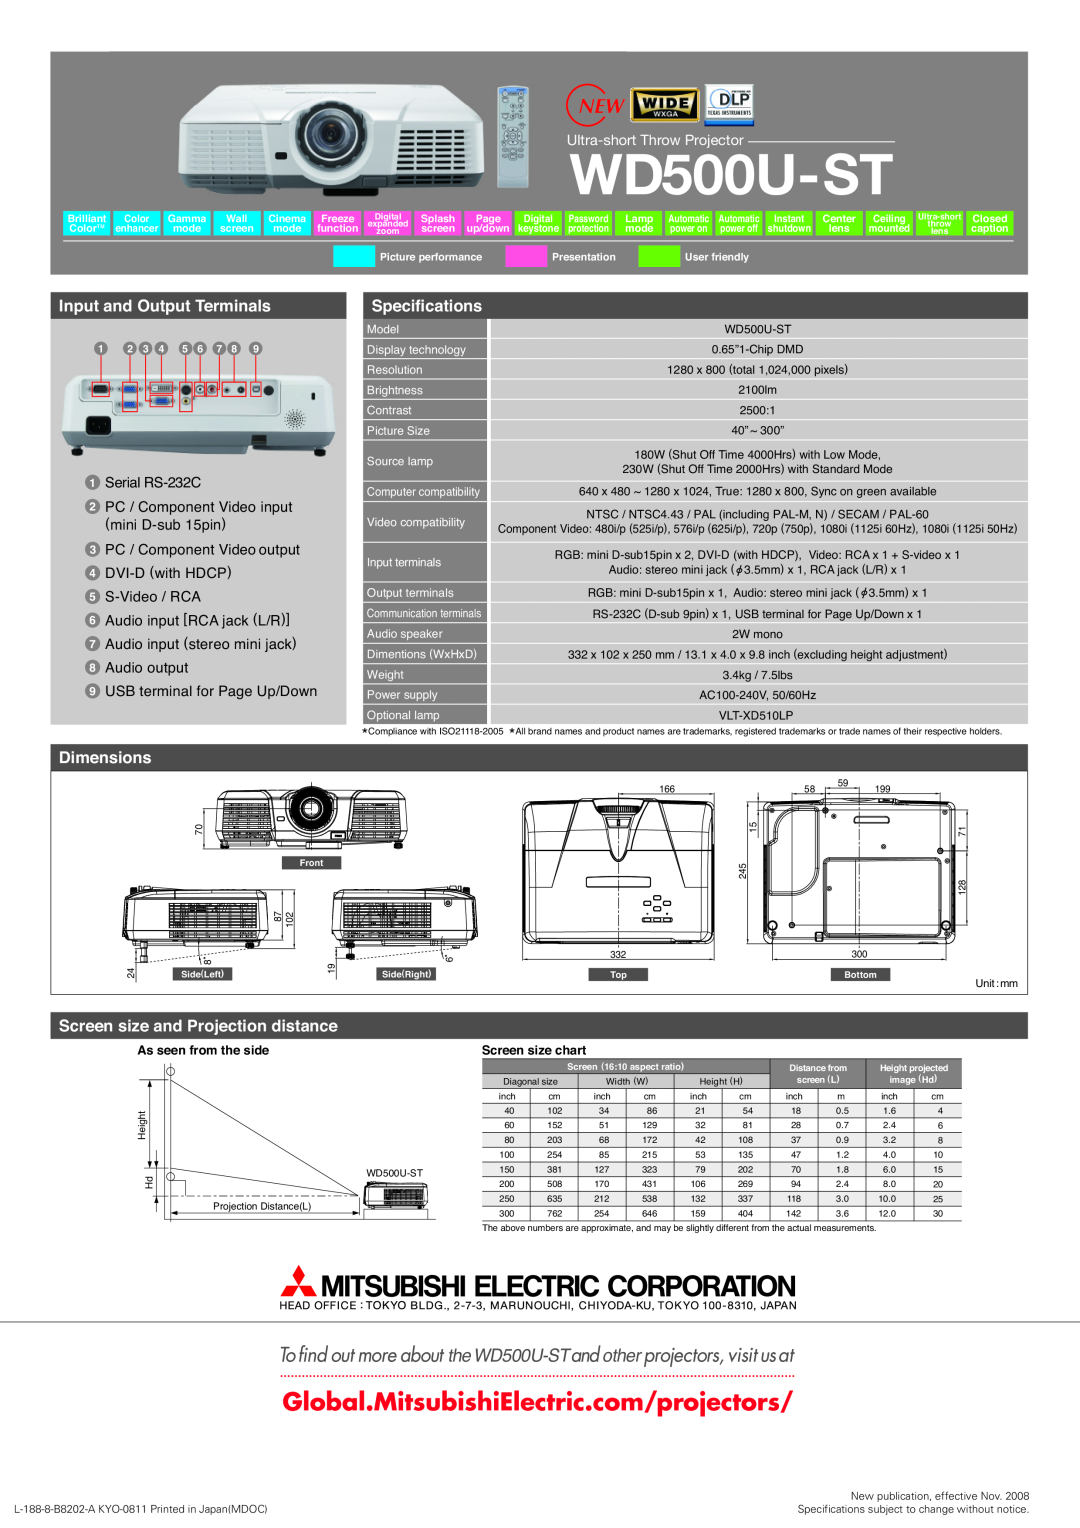 Mitsubishi Electronics the WD500U-STother, Input and Output Terminals, Specifications, Dimensions, Screen size chart 